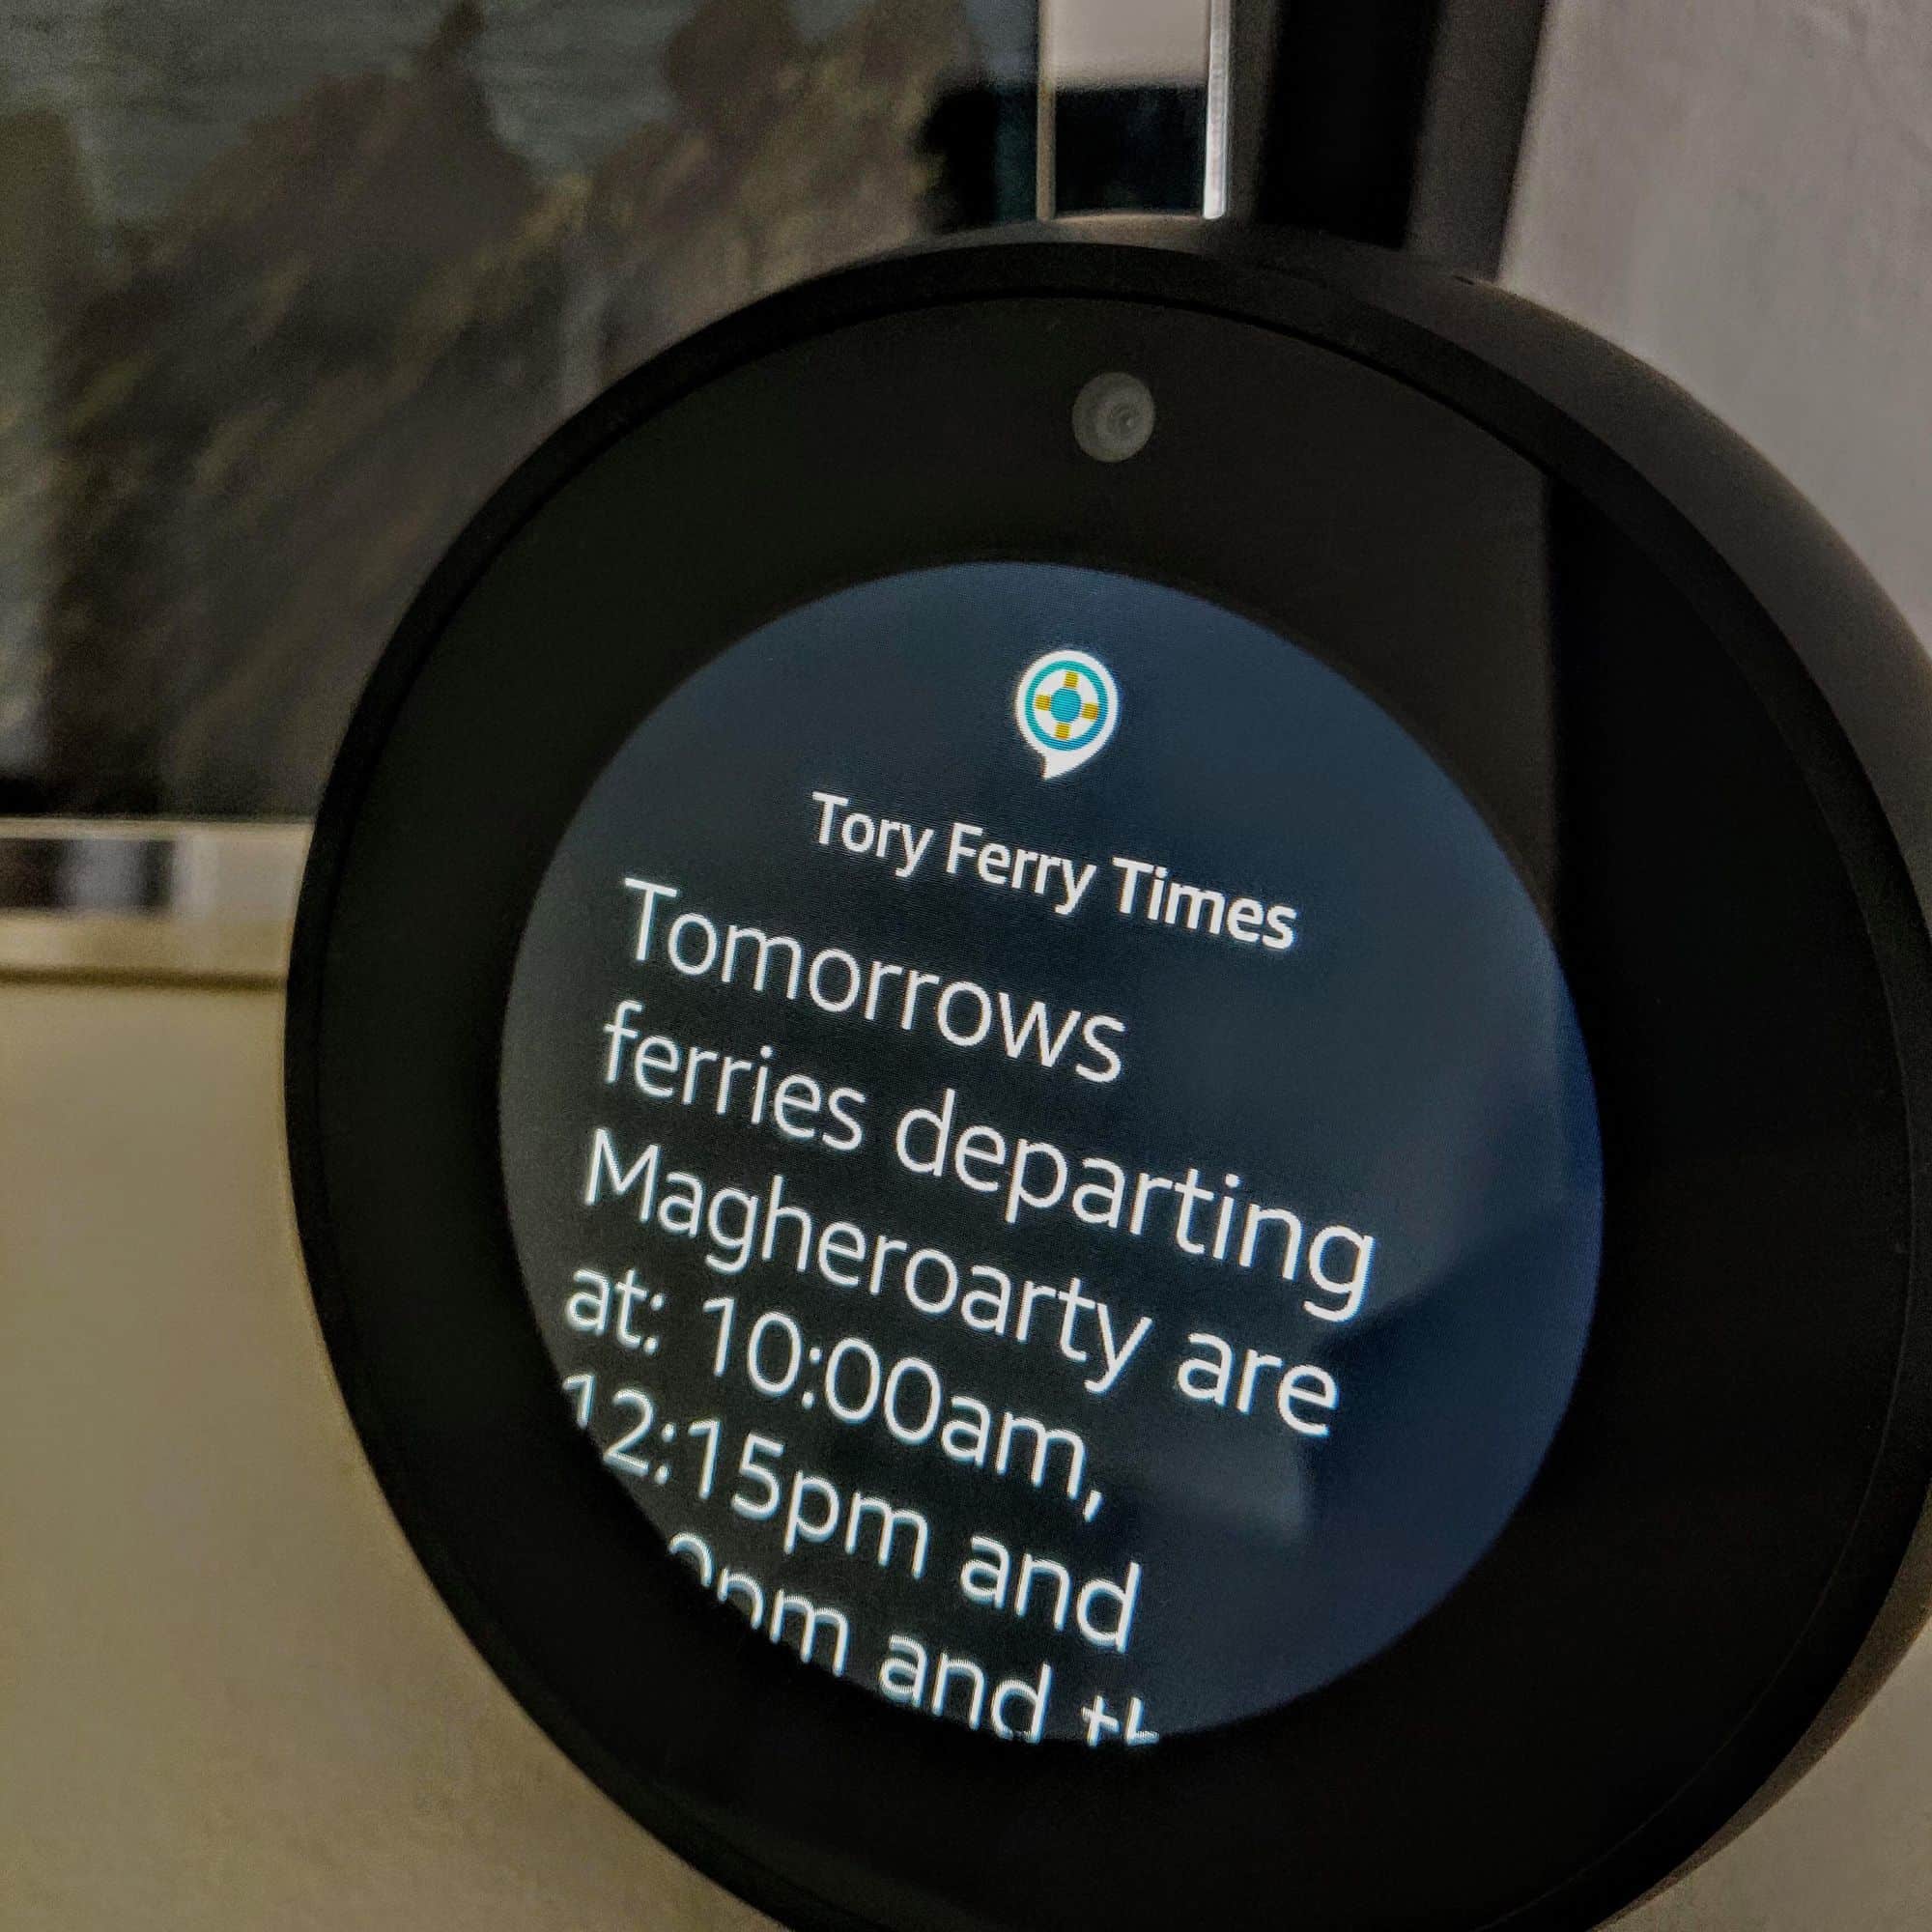 Alexa Spot with a full response from Tory Ferry